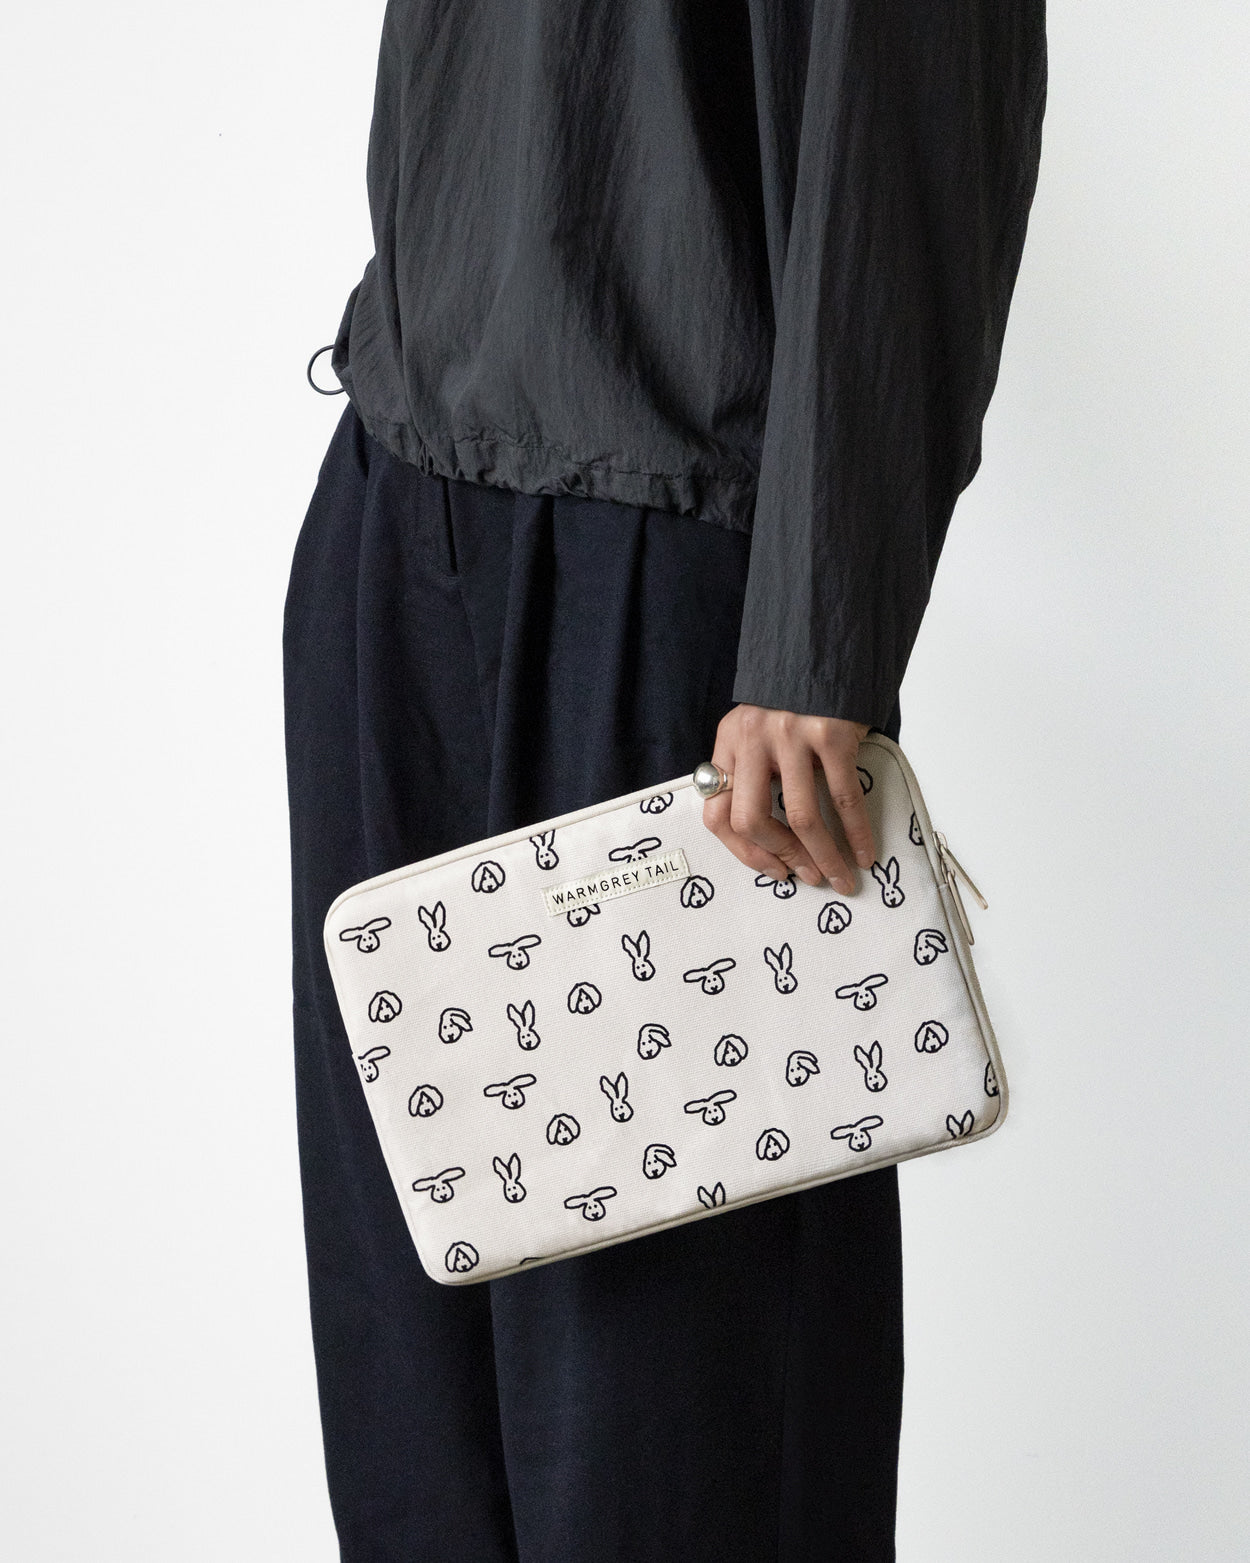 LAPTOP/TABLET POUCH - BUNNY BUNNY